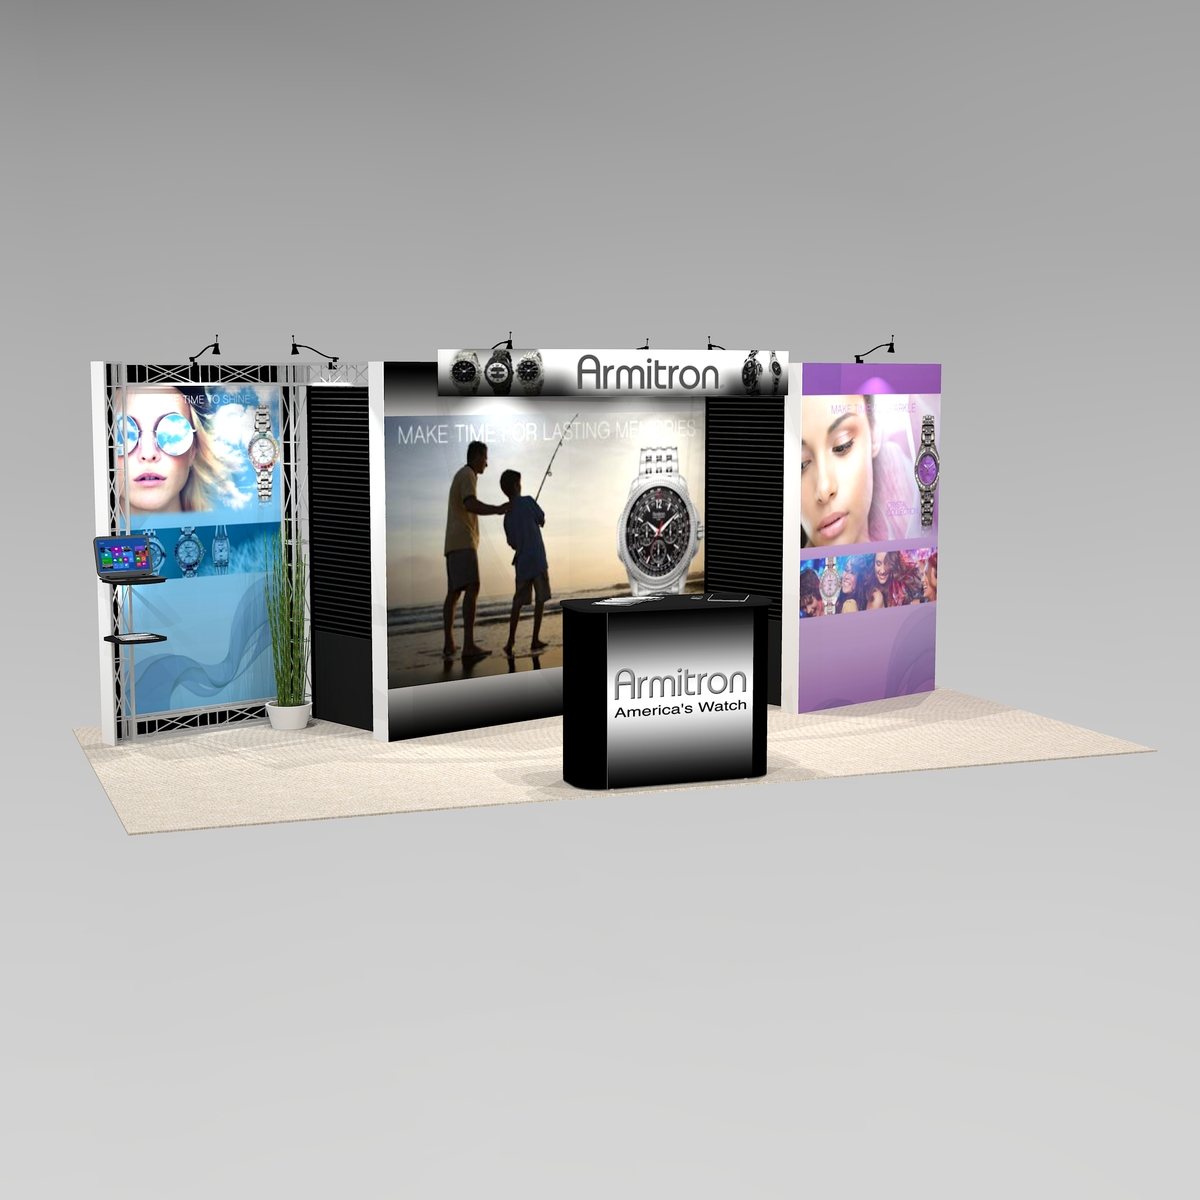 Customizable for Product trade show exhibit design DIA1020 Graphic Package B